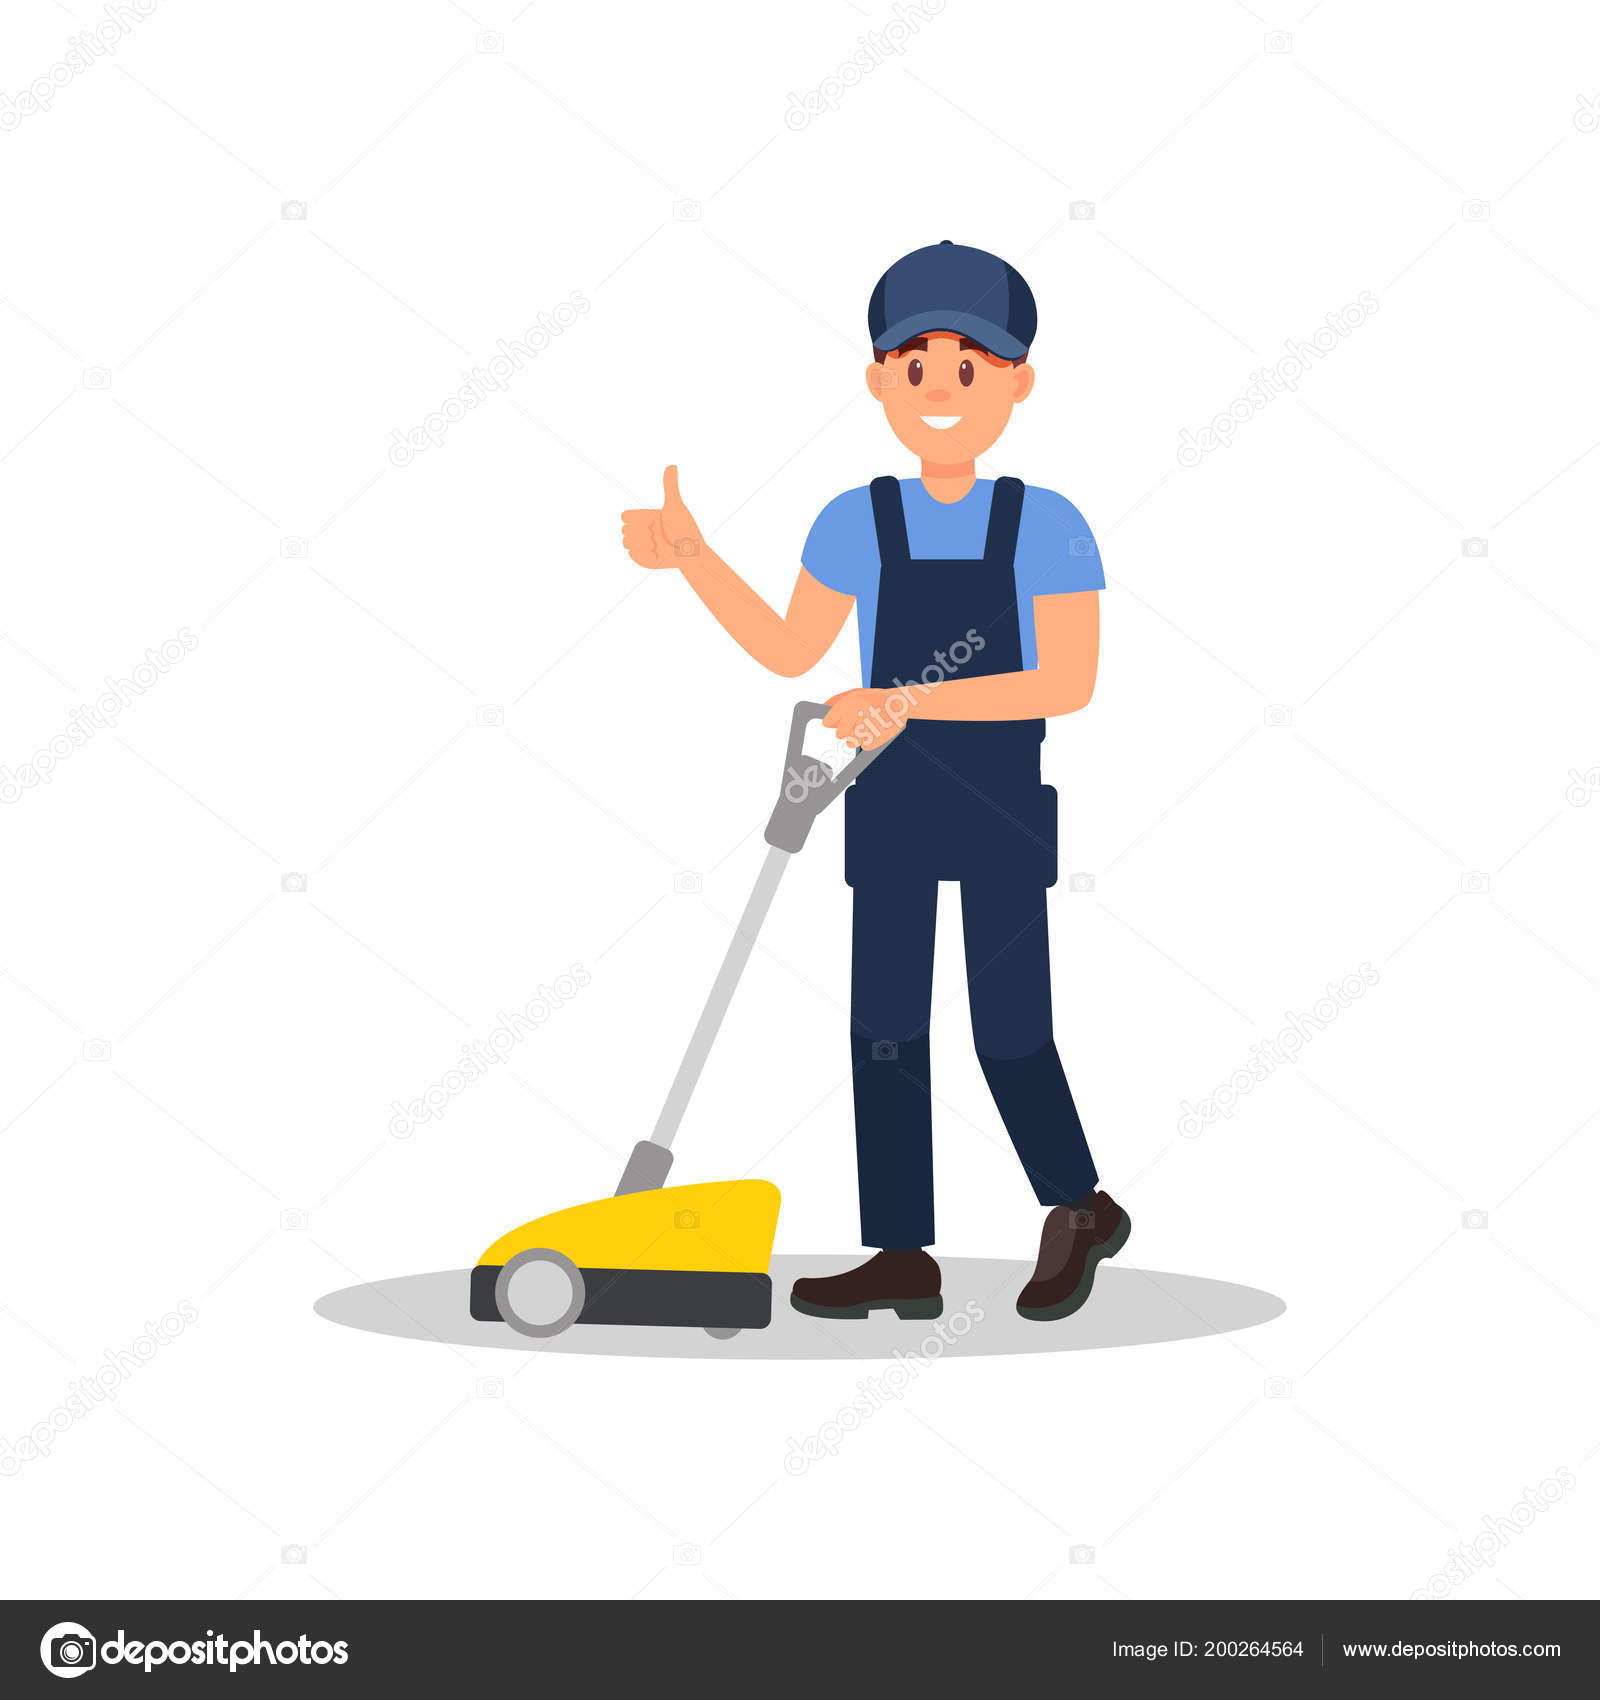 Smiling Man Cleaning Floor With Scrubber Machine And Showing Thumb